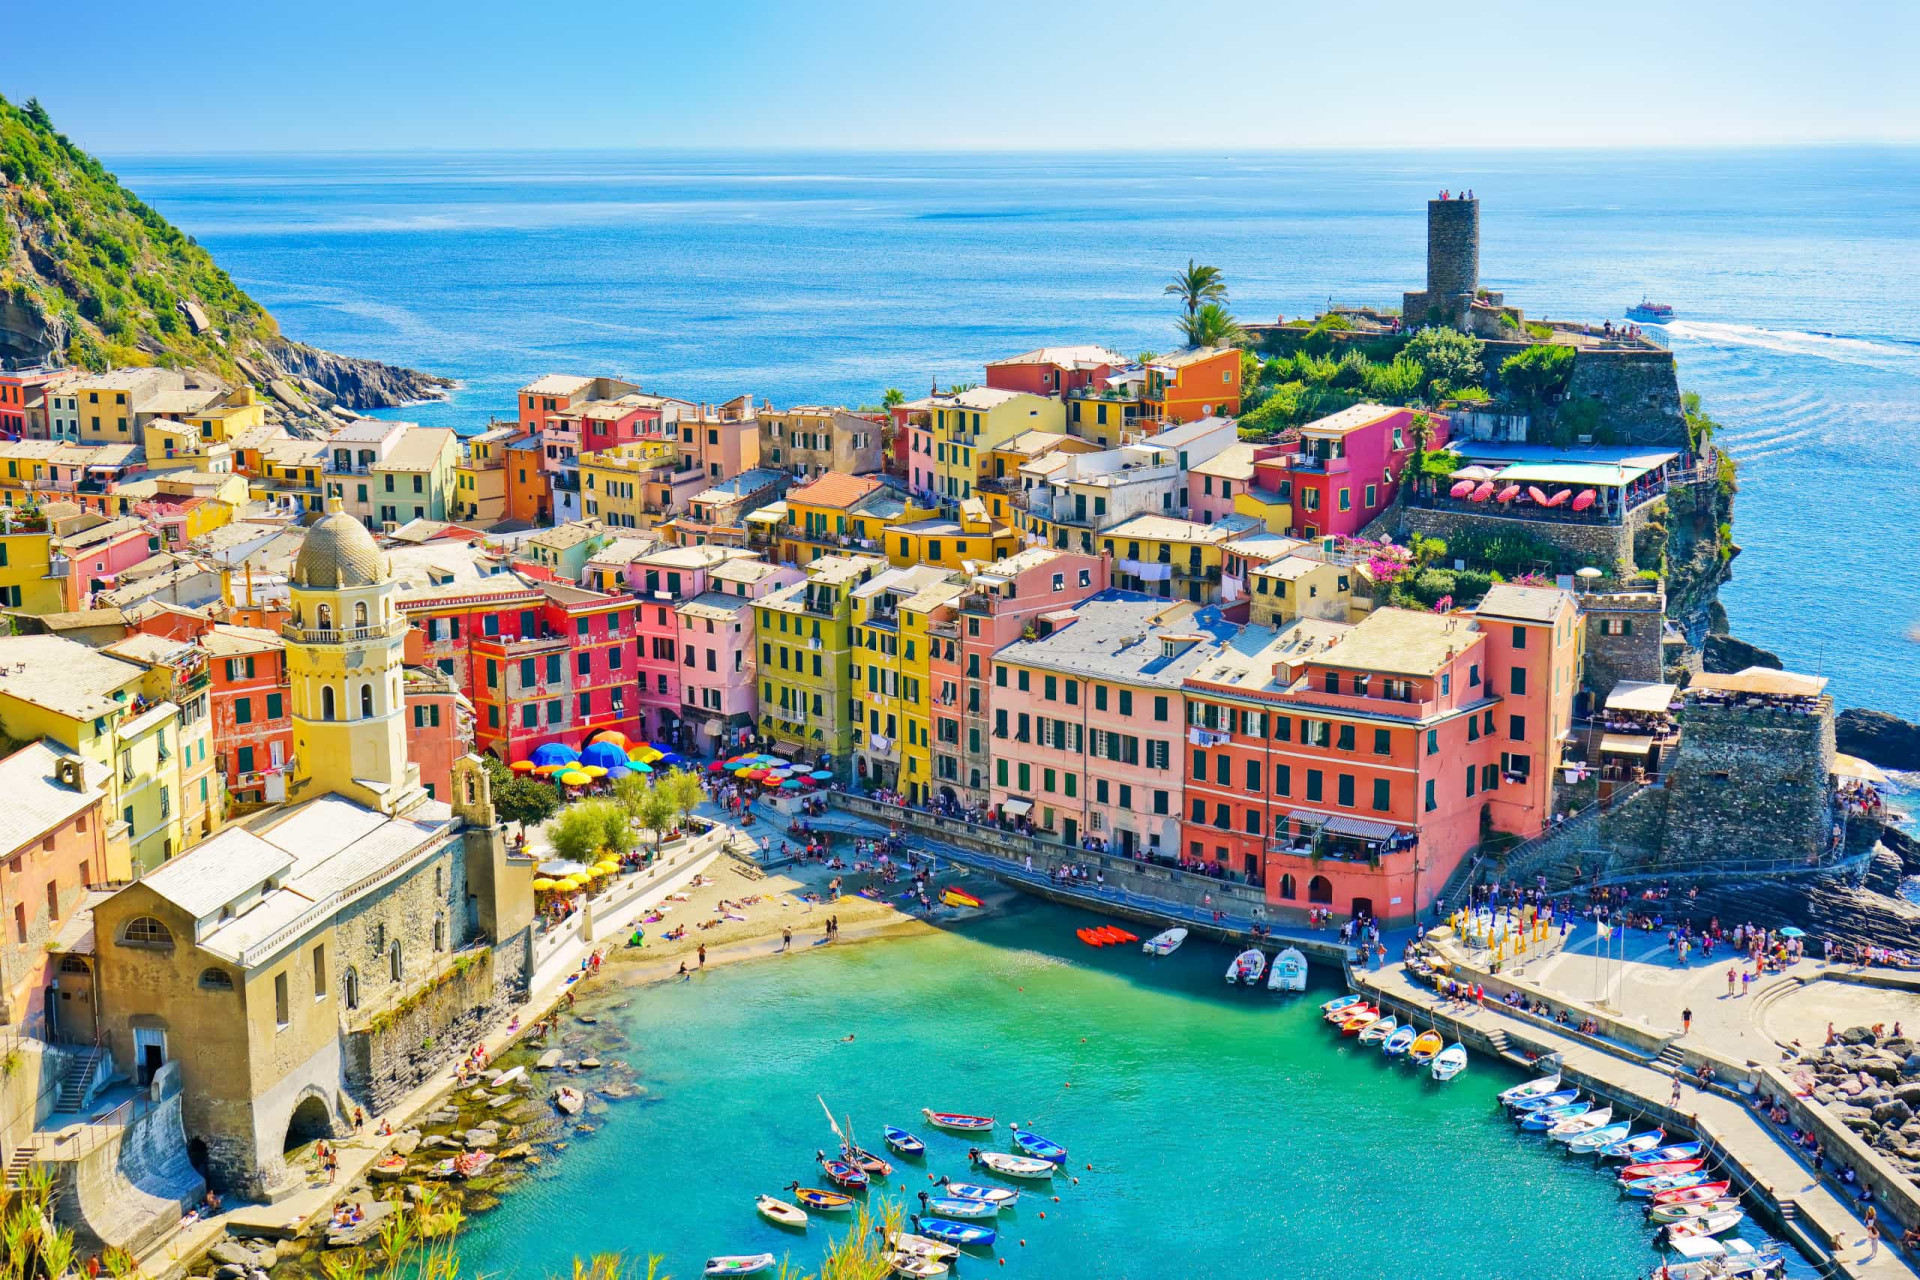 <p>One of the five towns that make up the Cinque Terre region, Vernazza is a multicolored jumble of townhouses set into the surrounding cliff face. It's arguably the most attractive destination on the Riviera.</p><p>You may also like:<a href="https://www.starsinsider.com/n/475462?utm_source=msn.com&utm_medium=display&utm_campaign=referral_description&utm_content=481361v4en-en_selected"> Stars who succumbed to heart attacks </a></p>